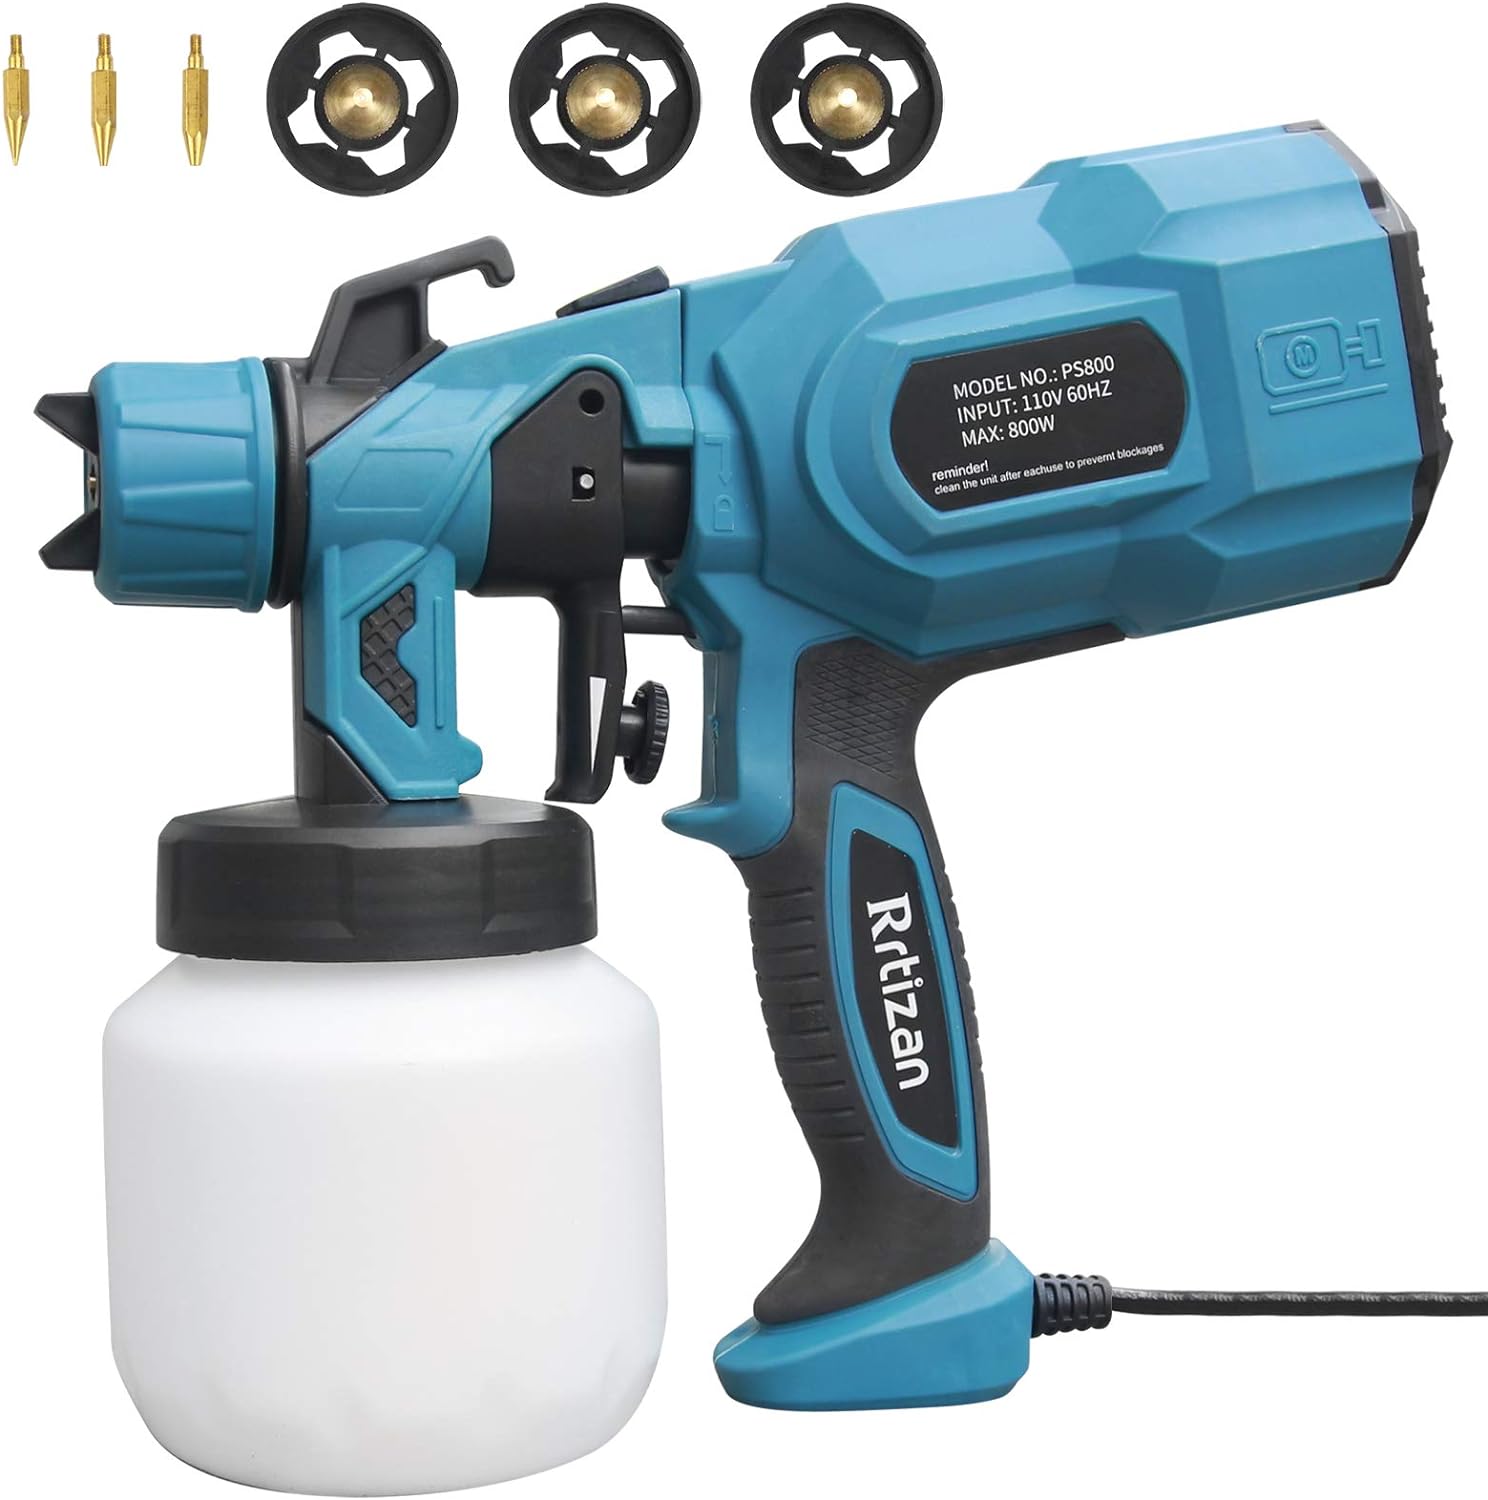 Rrtizan Paint Sprayer, 800W High Power HVLP Spray Gun, Electric Paint Gun with 3 Copper Nozzles, 3 Spray Patterns for Painting Ceiling,